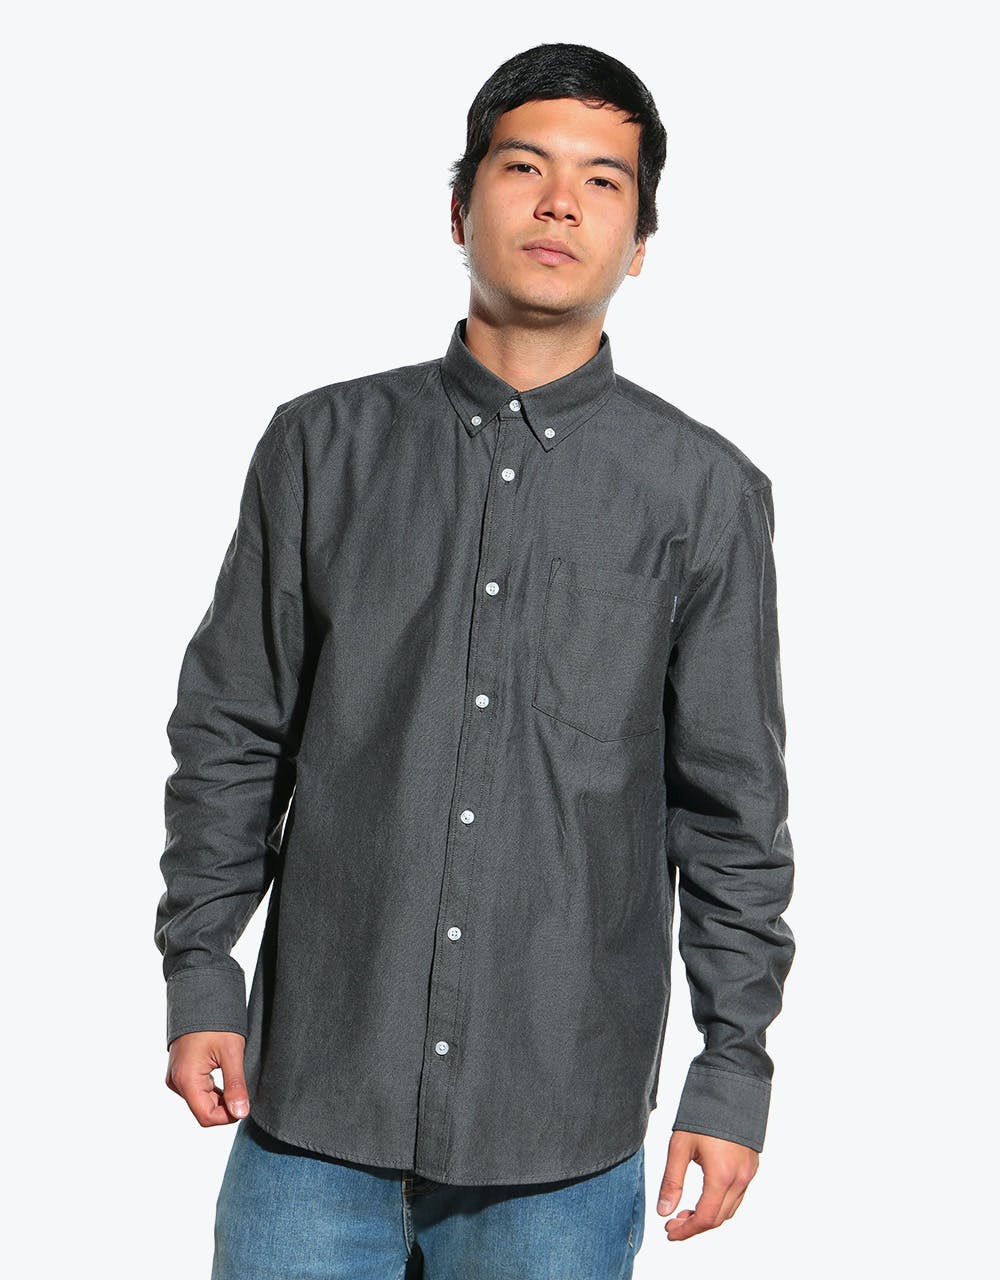 Carhartt WIP L/S Dalton Shirt - Shiver (Heavy Rinsed) – Route One